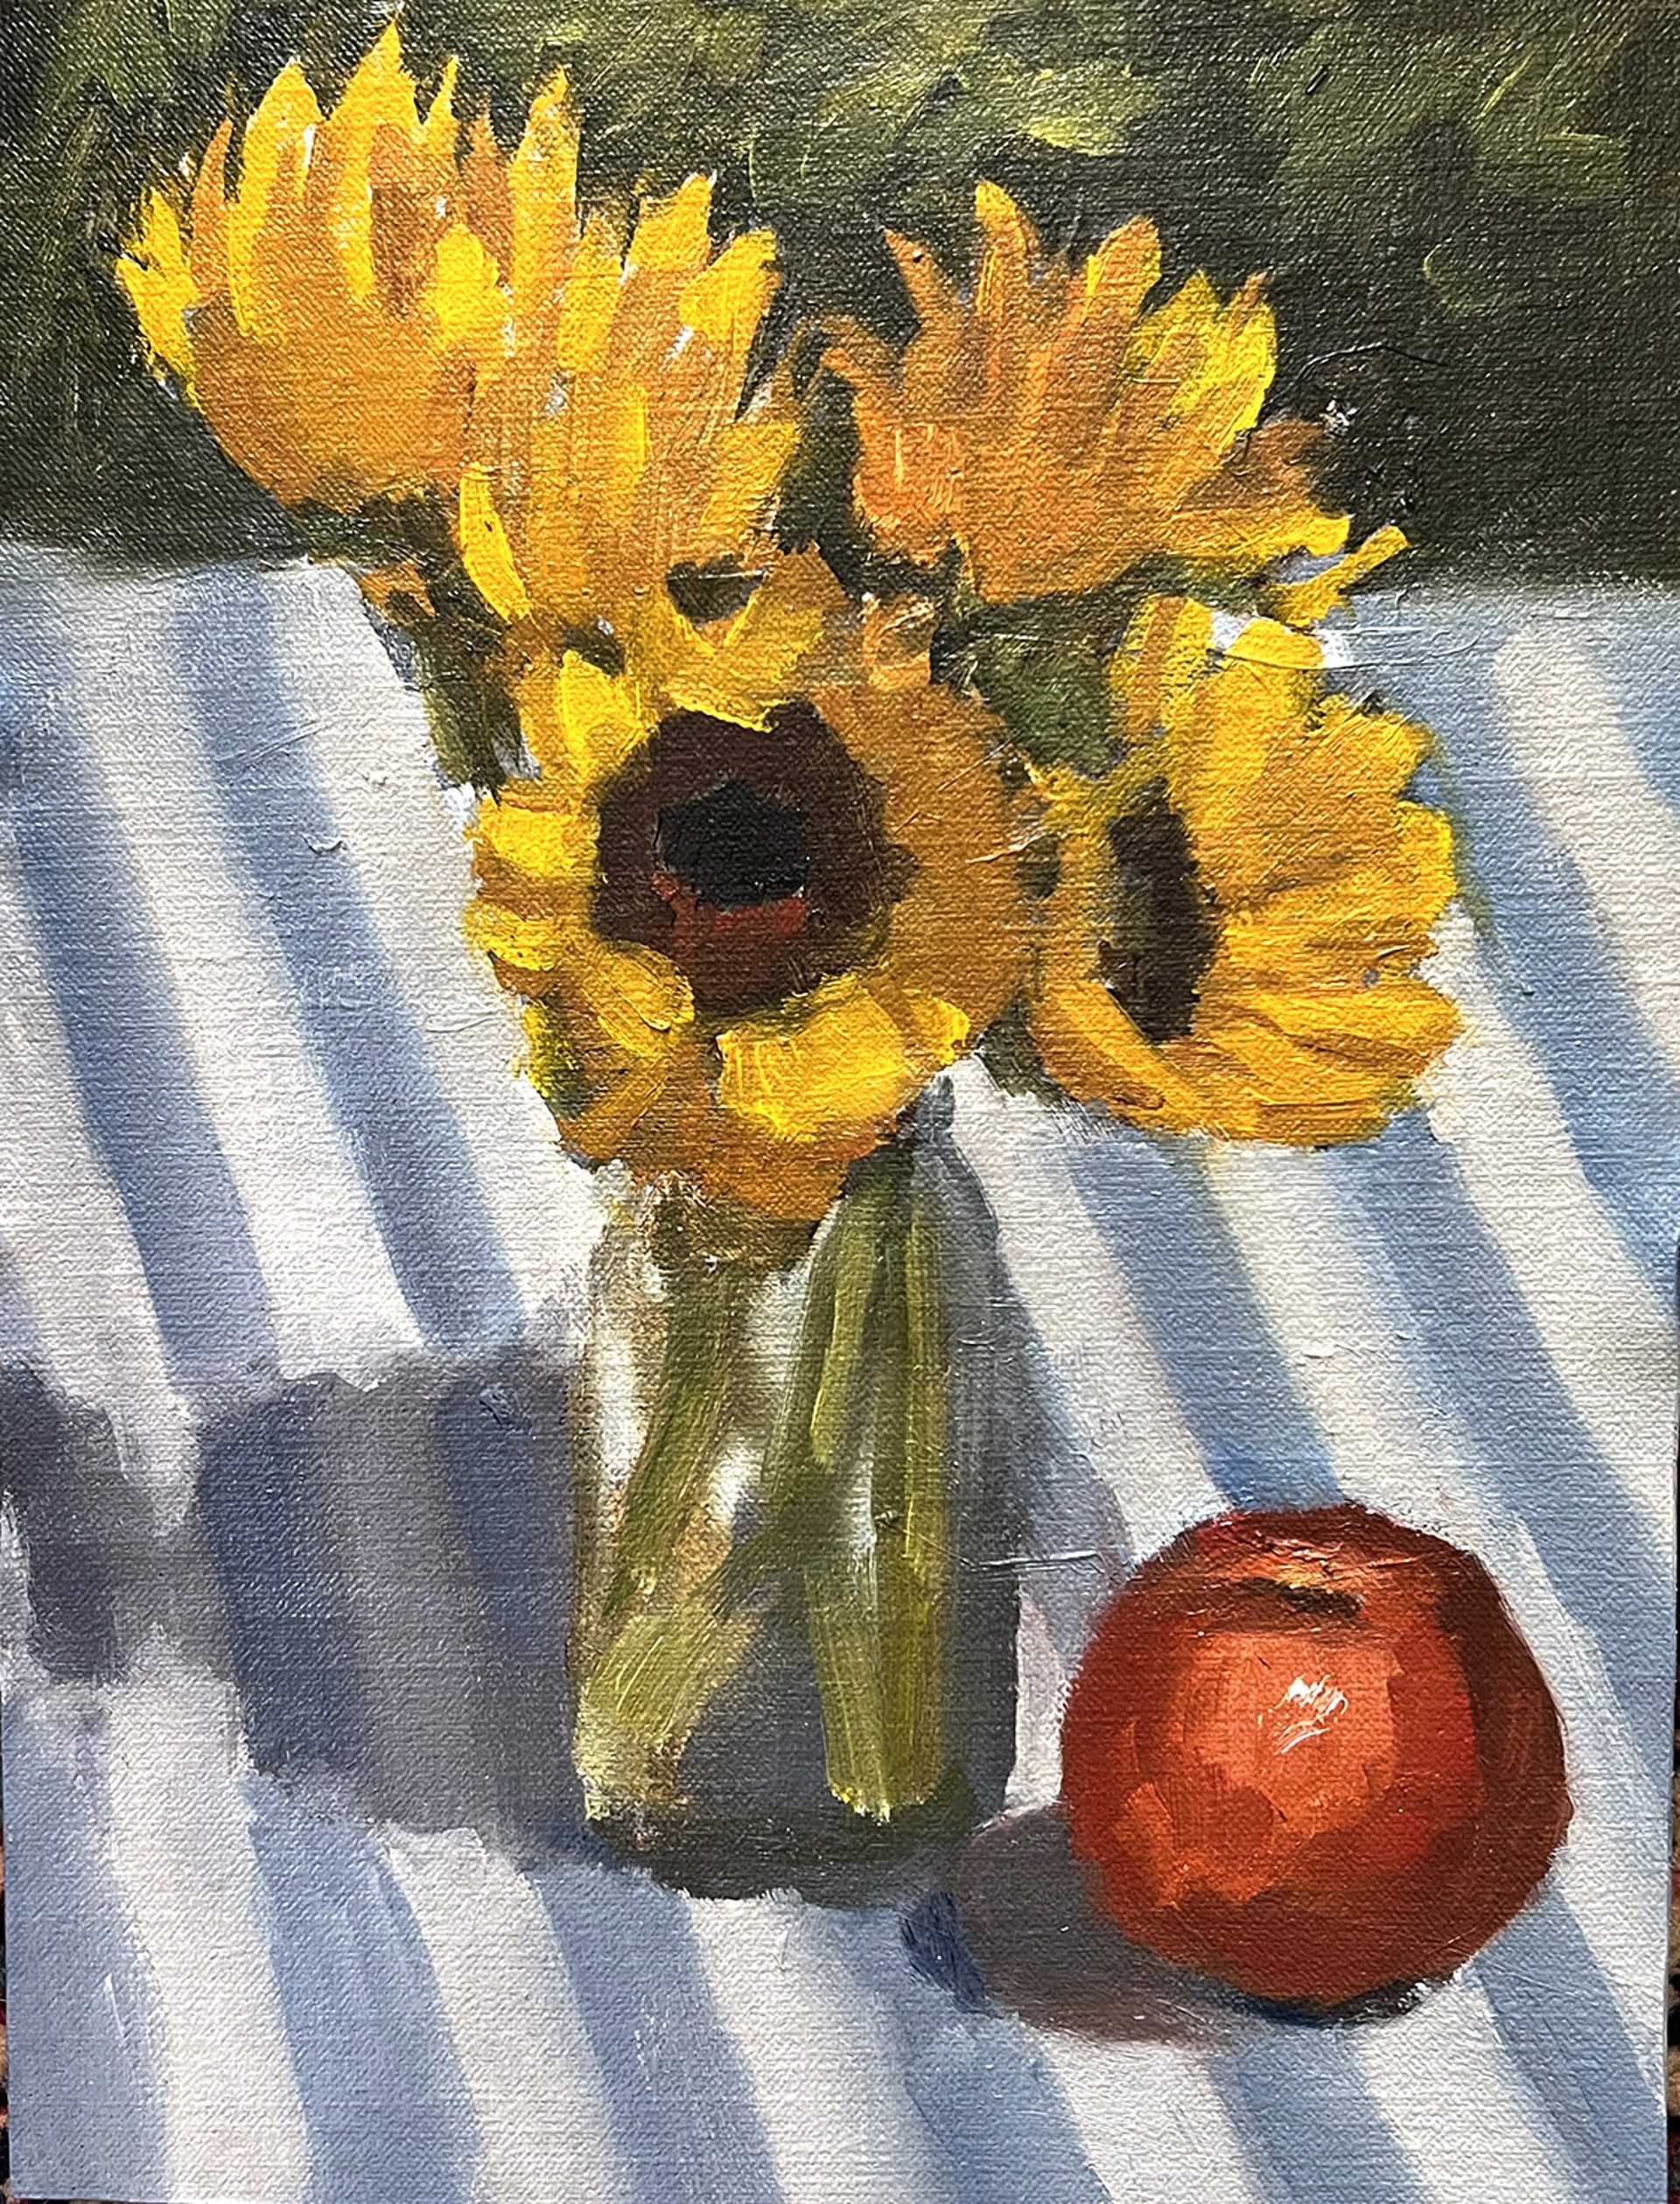 Sunflowers and Apple by Laura Murphey